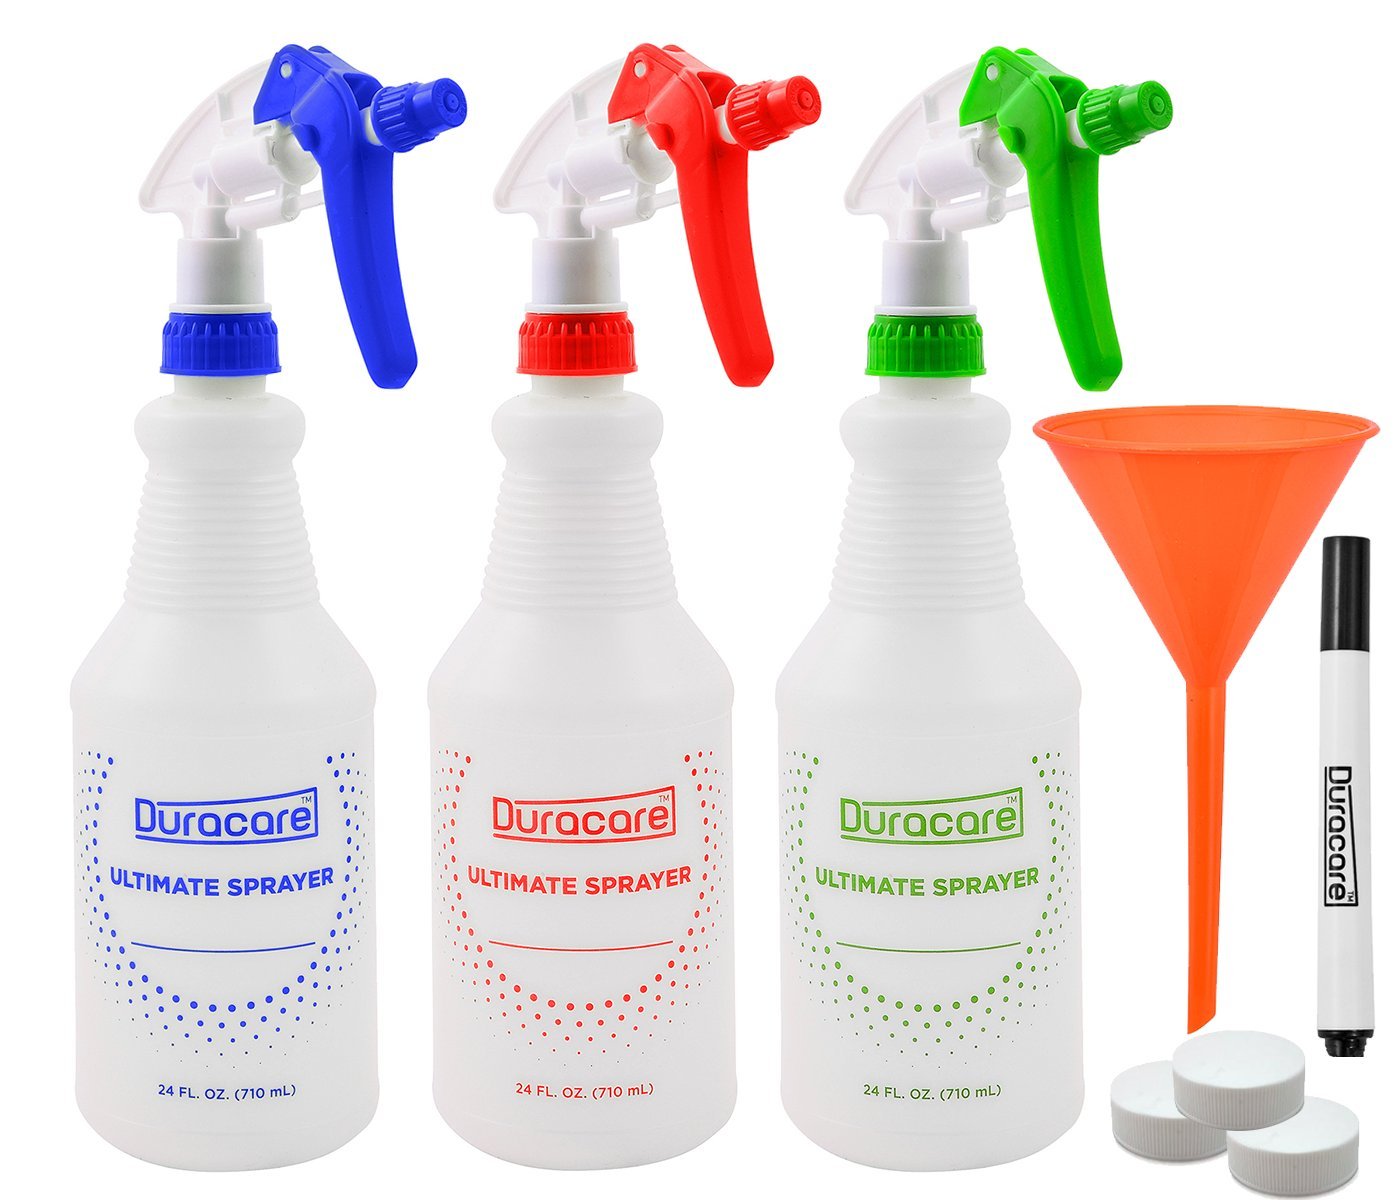 Duracare Plastic Heavy Duty Leak Free Trigger Spray Bottles with Adjustable Nozzle and Measurements - For All Purpose Cleaning Solutions, Plants, Mister, Household and Commercial Use (Set of 3, 24oz)